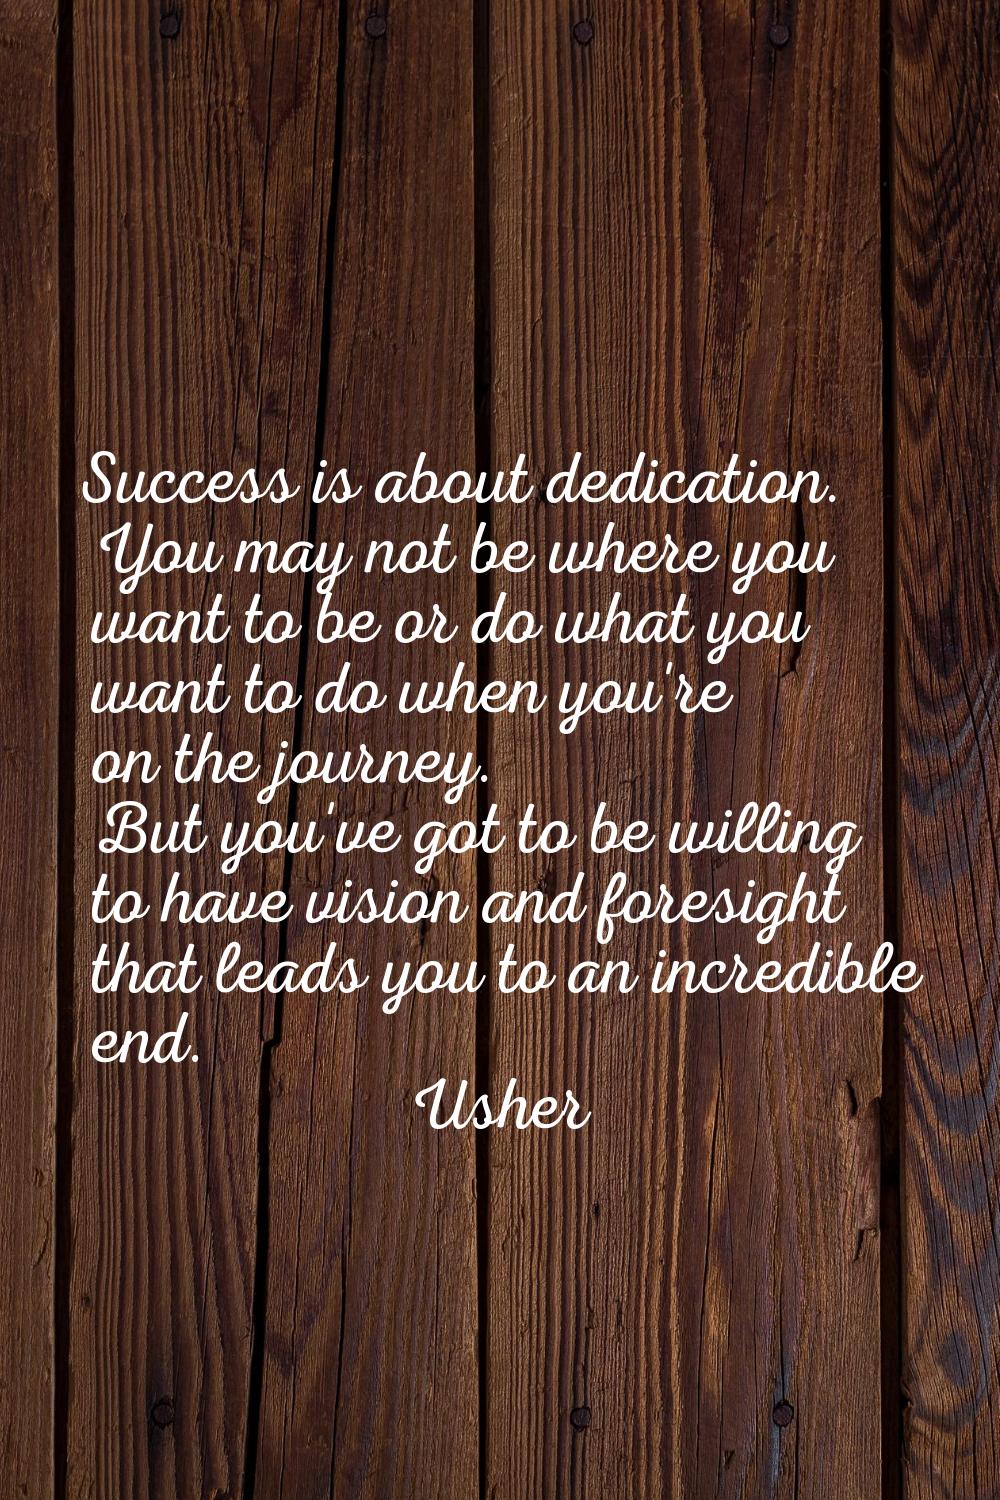 Success is about dedication. You may not be where you want to be or do what you want to do when you